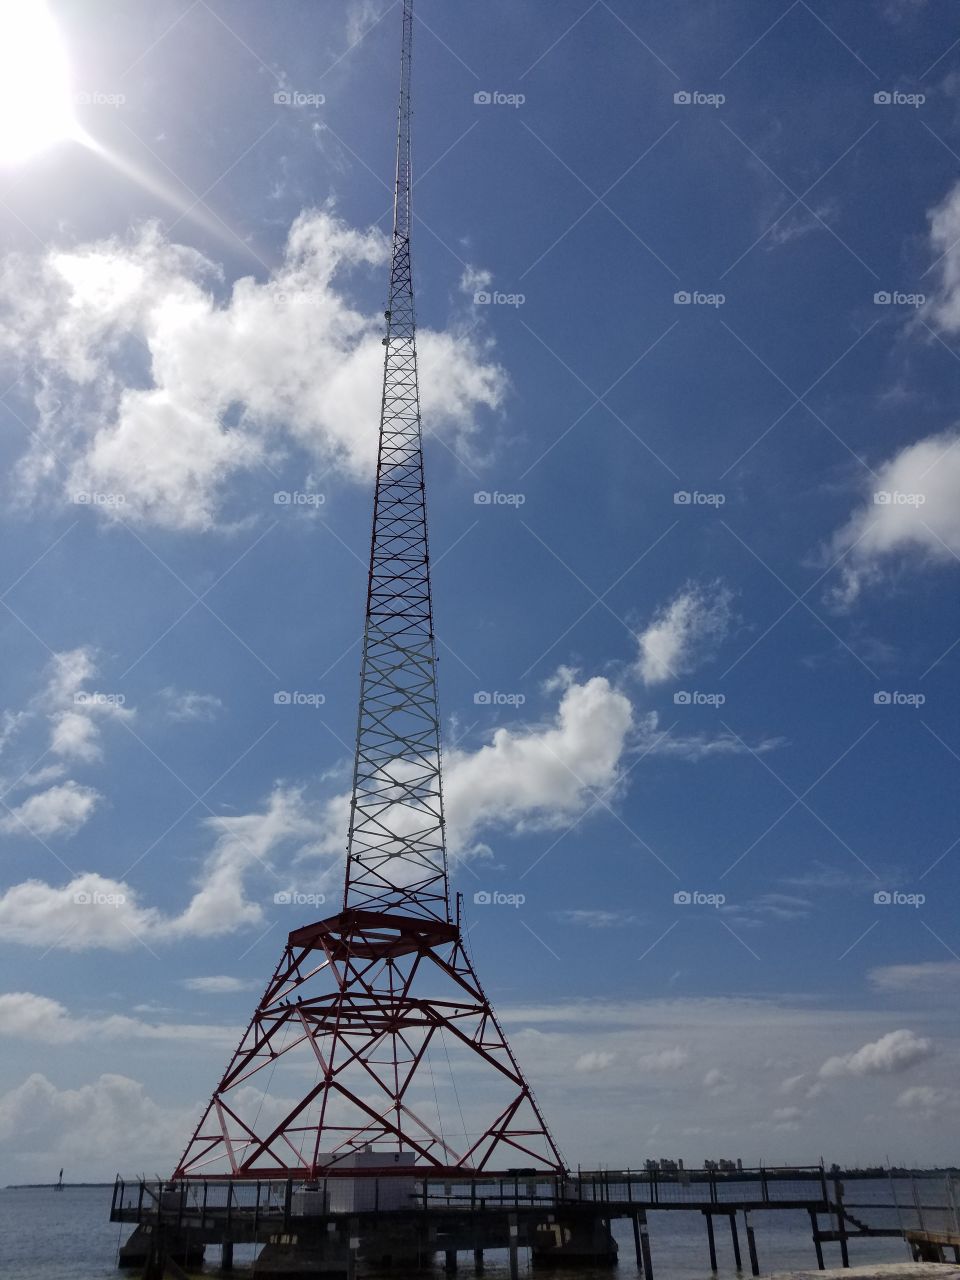 No Person, Sky, Tower, Wireless, Steel